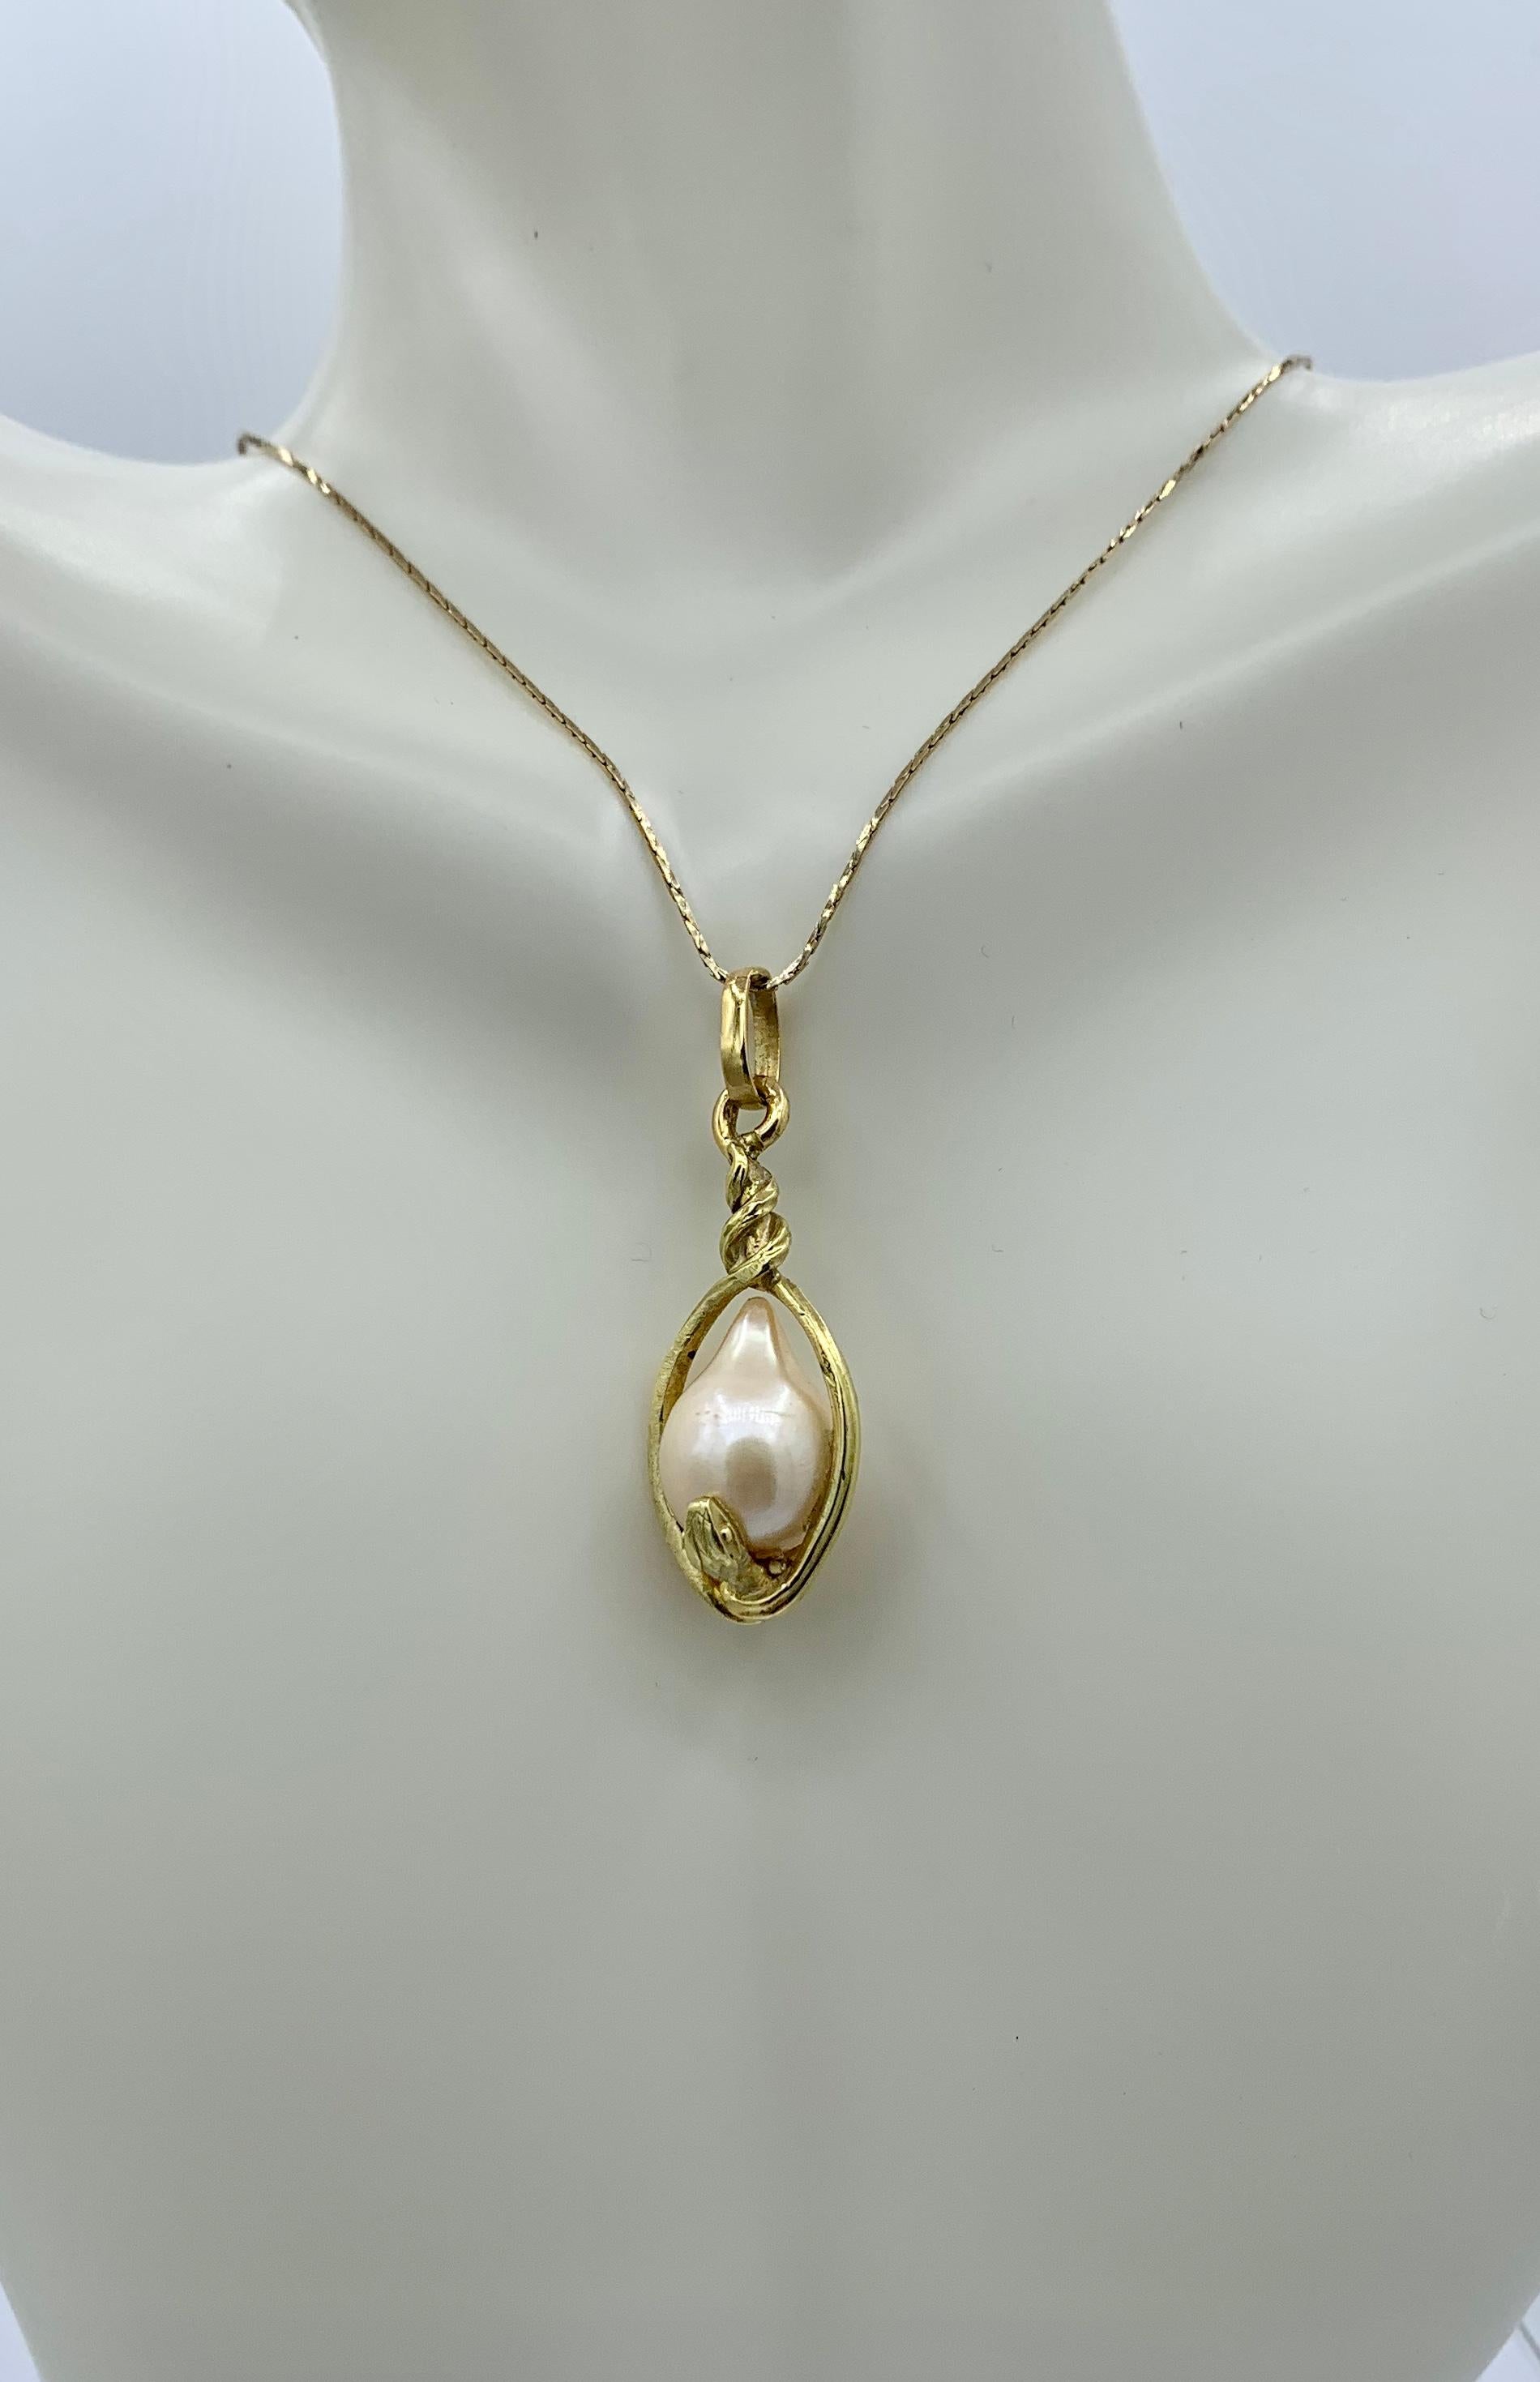 This is a rare antique Victorian Two Snake Pendant Necklace depicting a snake or serpent wrapped around an egg or globe.  The snake pendant is beautifully created in 14 Karat Yellow Gold with a high carat gold wash on top of the 14 Karat Gold as was